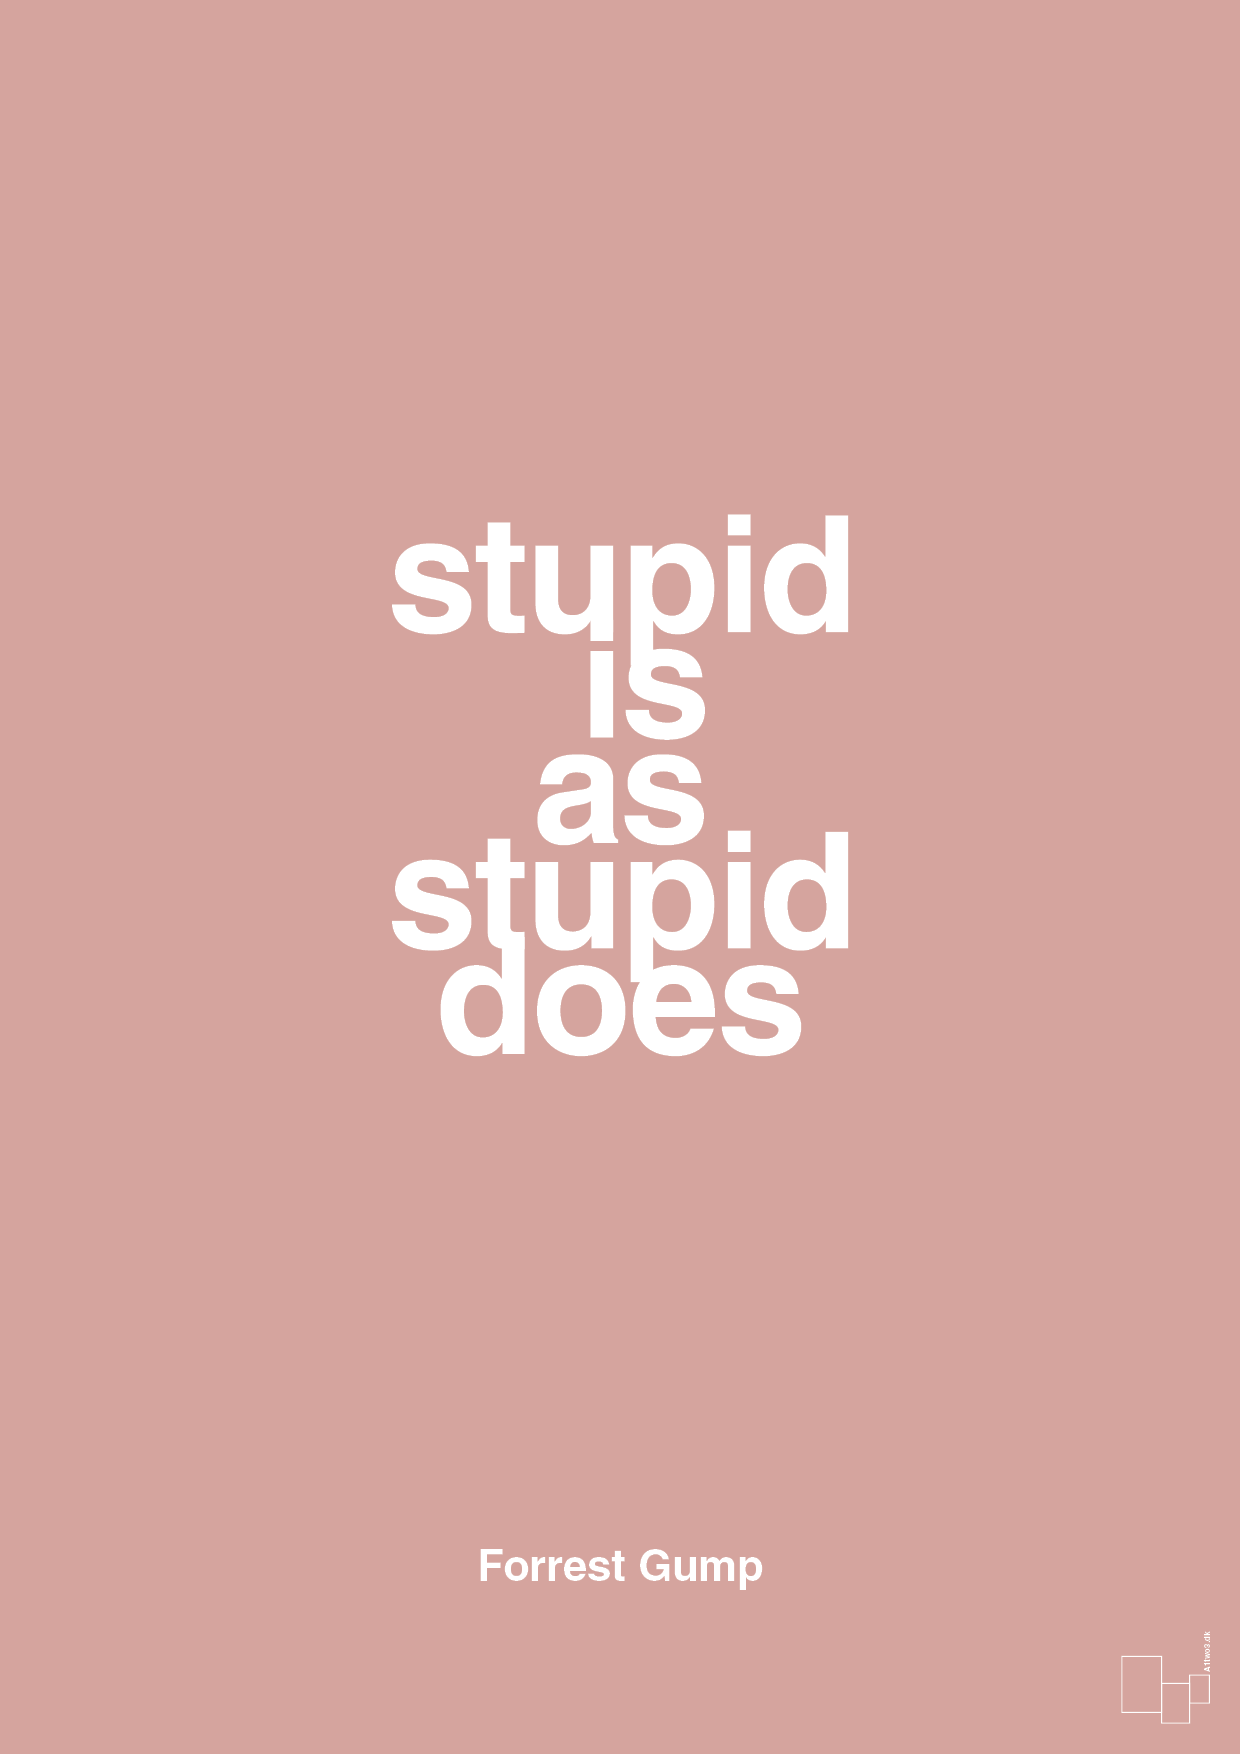 stupid is as stupid does - Plakat med Citater i Bubble Shell